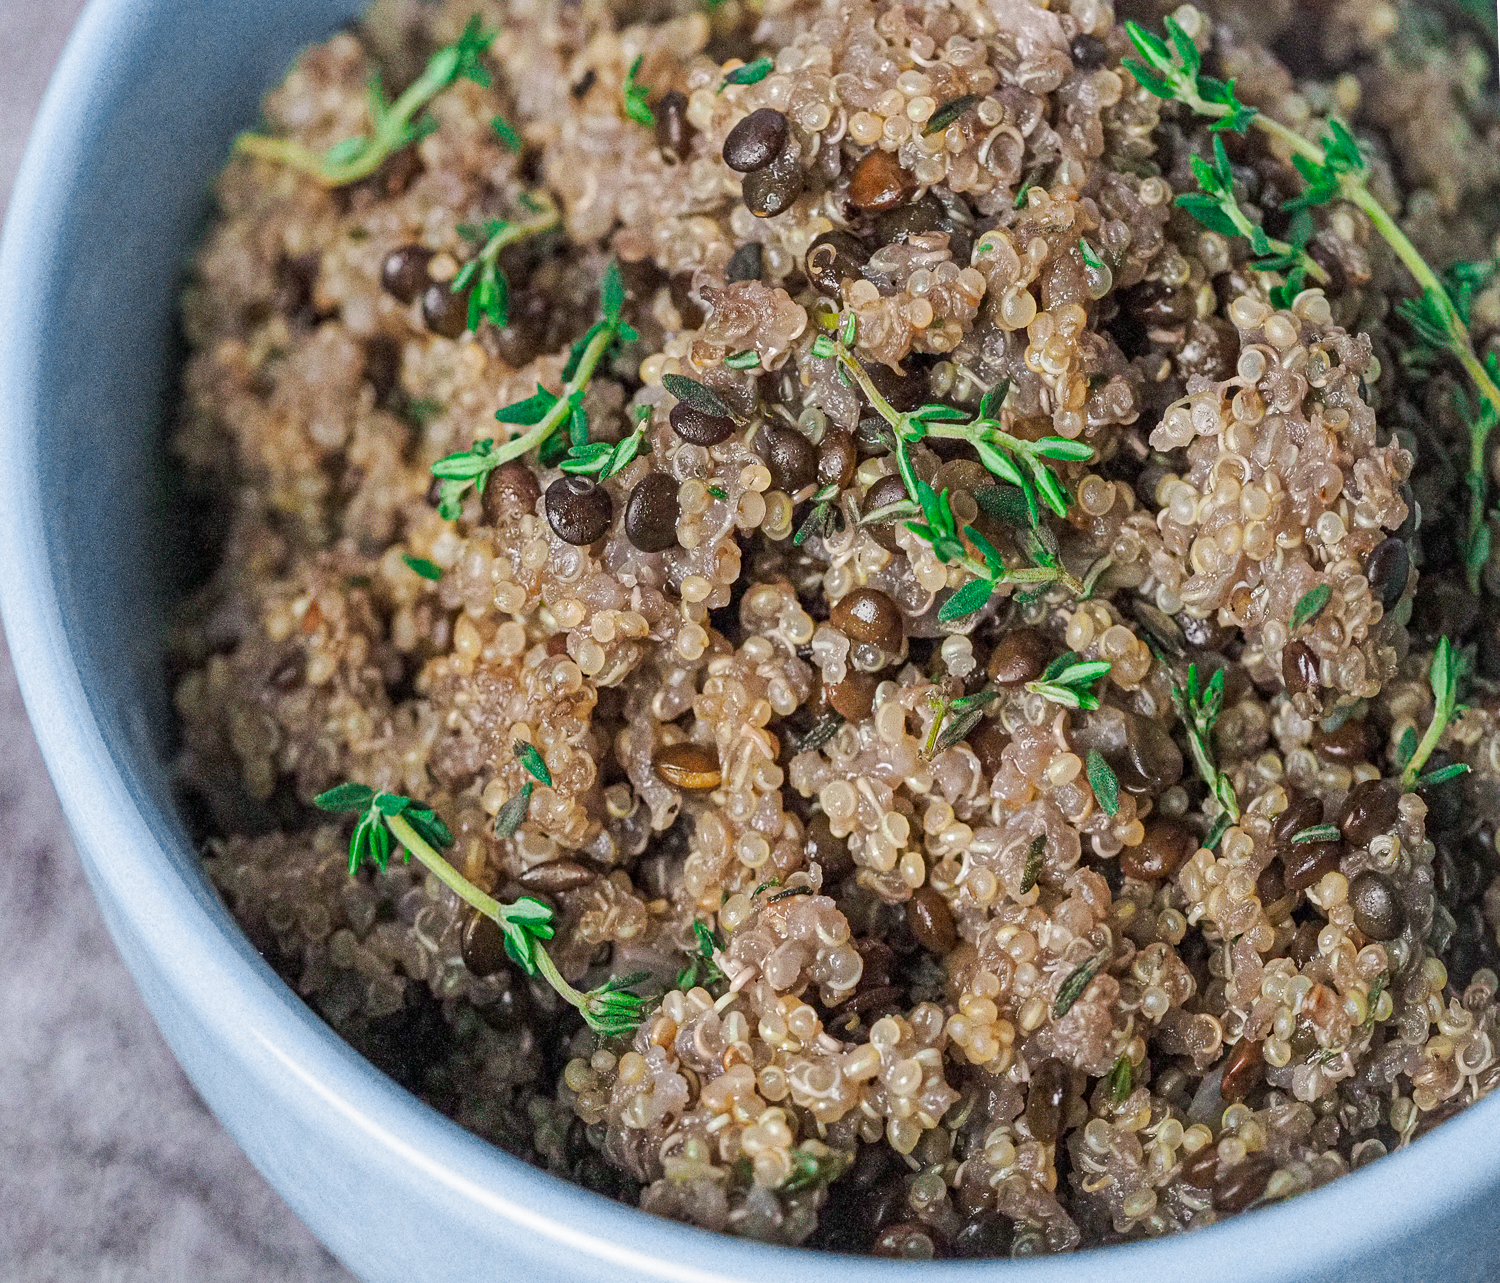 cooked quinoa and lentils in a bowl garnished with fresh thyme.